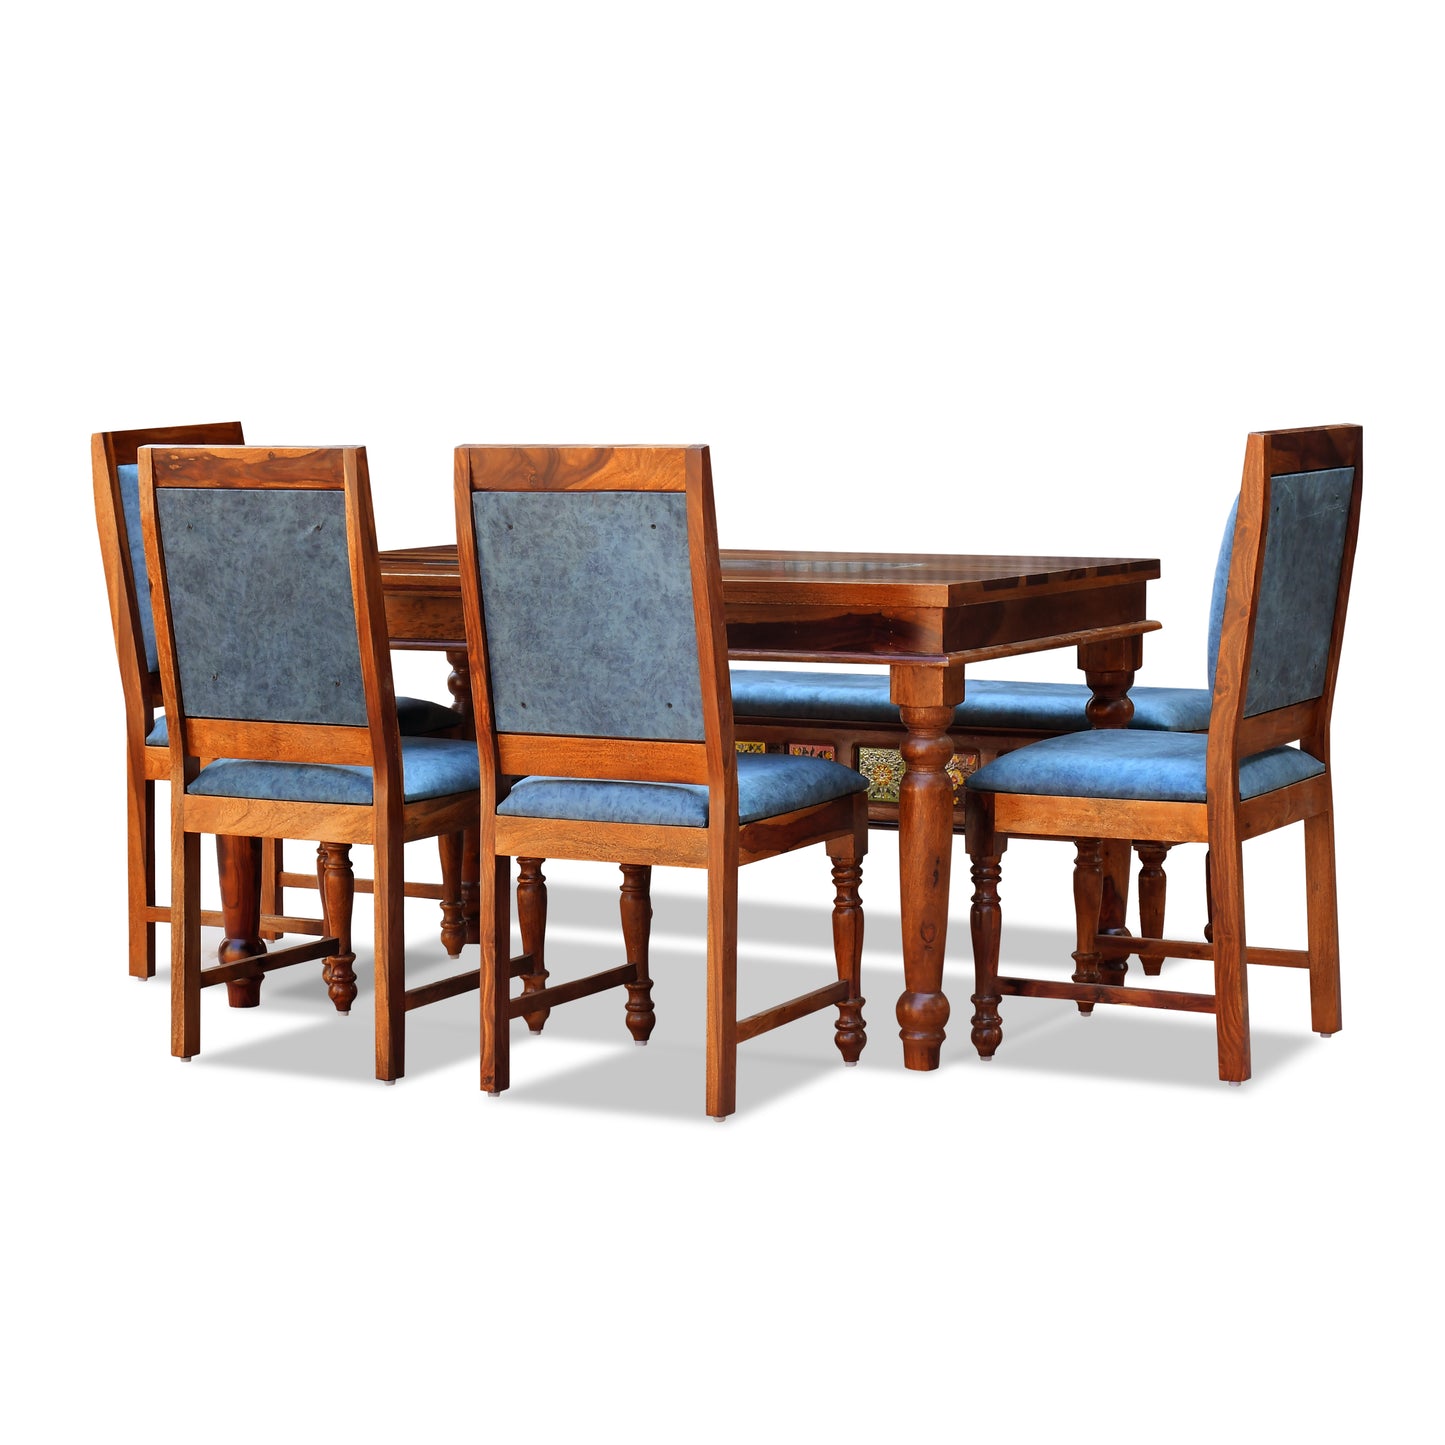 MoonWooden Sheesham Wooden Dining Table 6 Seater with Cushion Chair|Solid Wood | Seater Dinning Table with 6 Chairs for Restaurants, Home & Hotel | Premium Polish Honey Finish